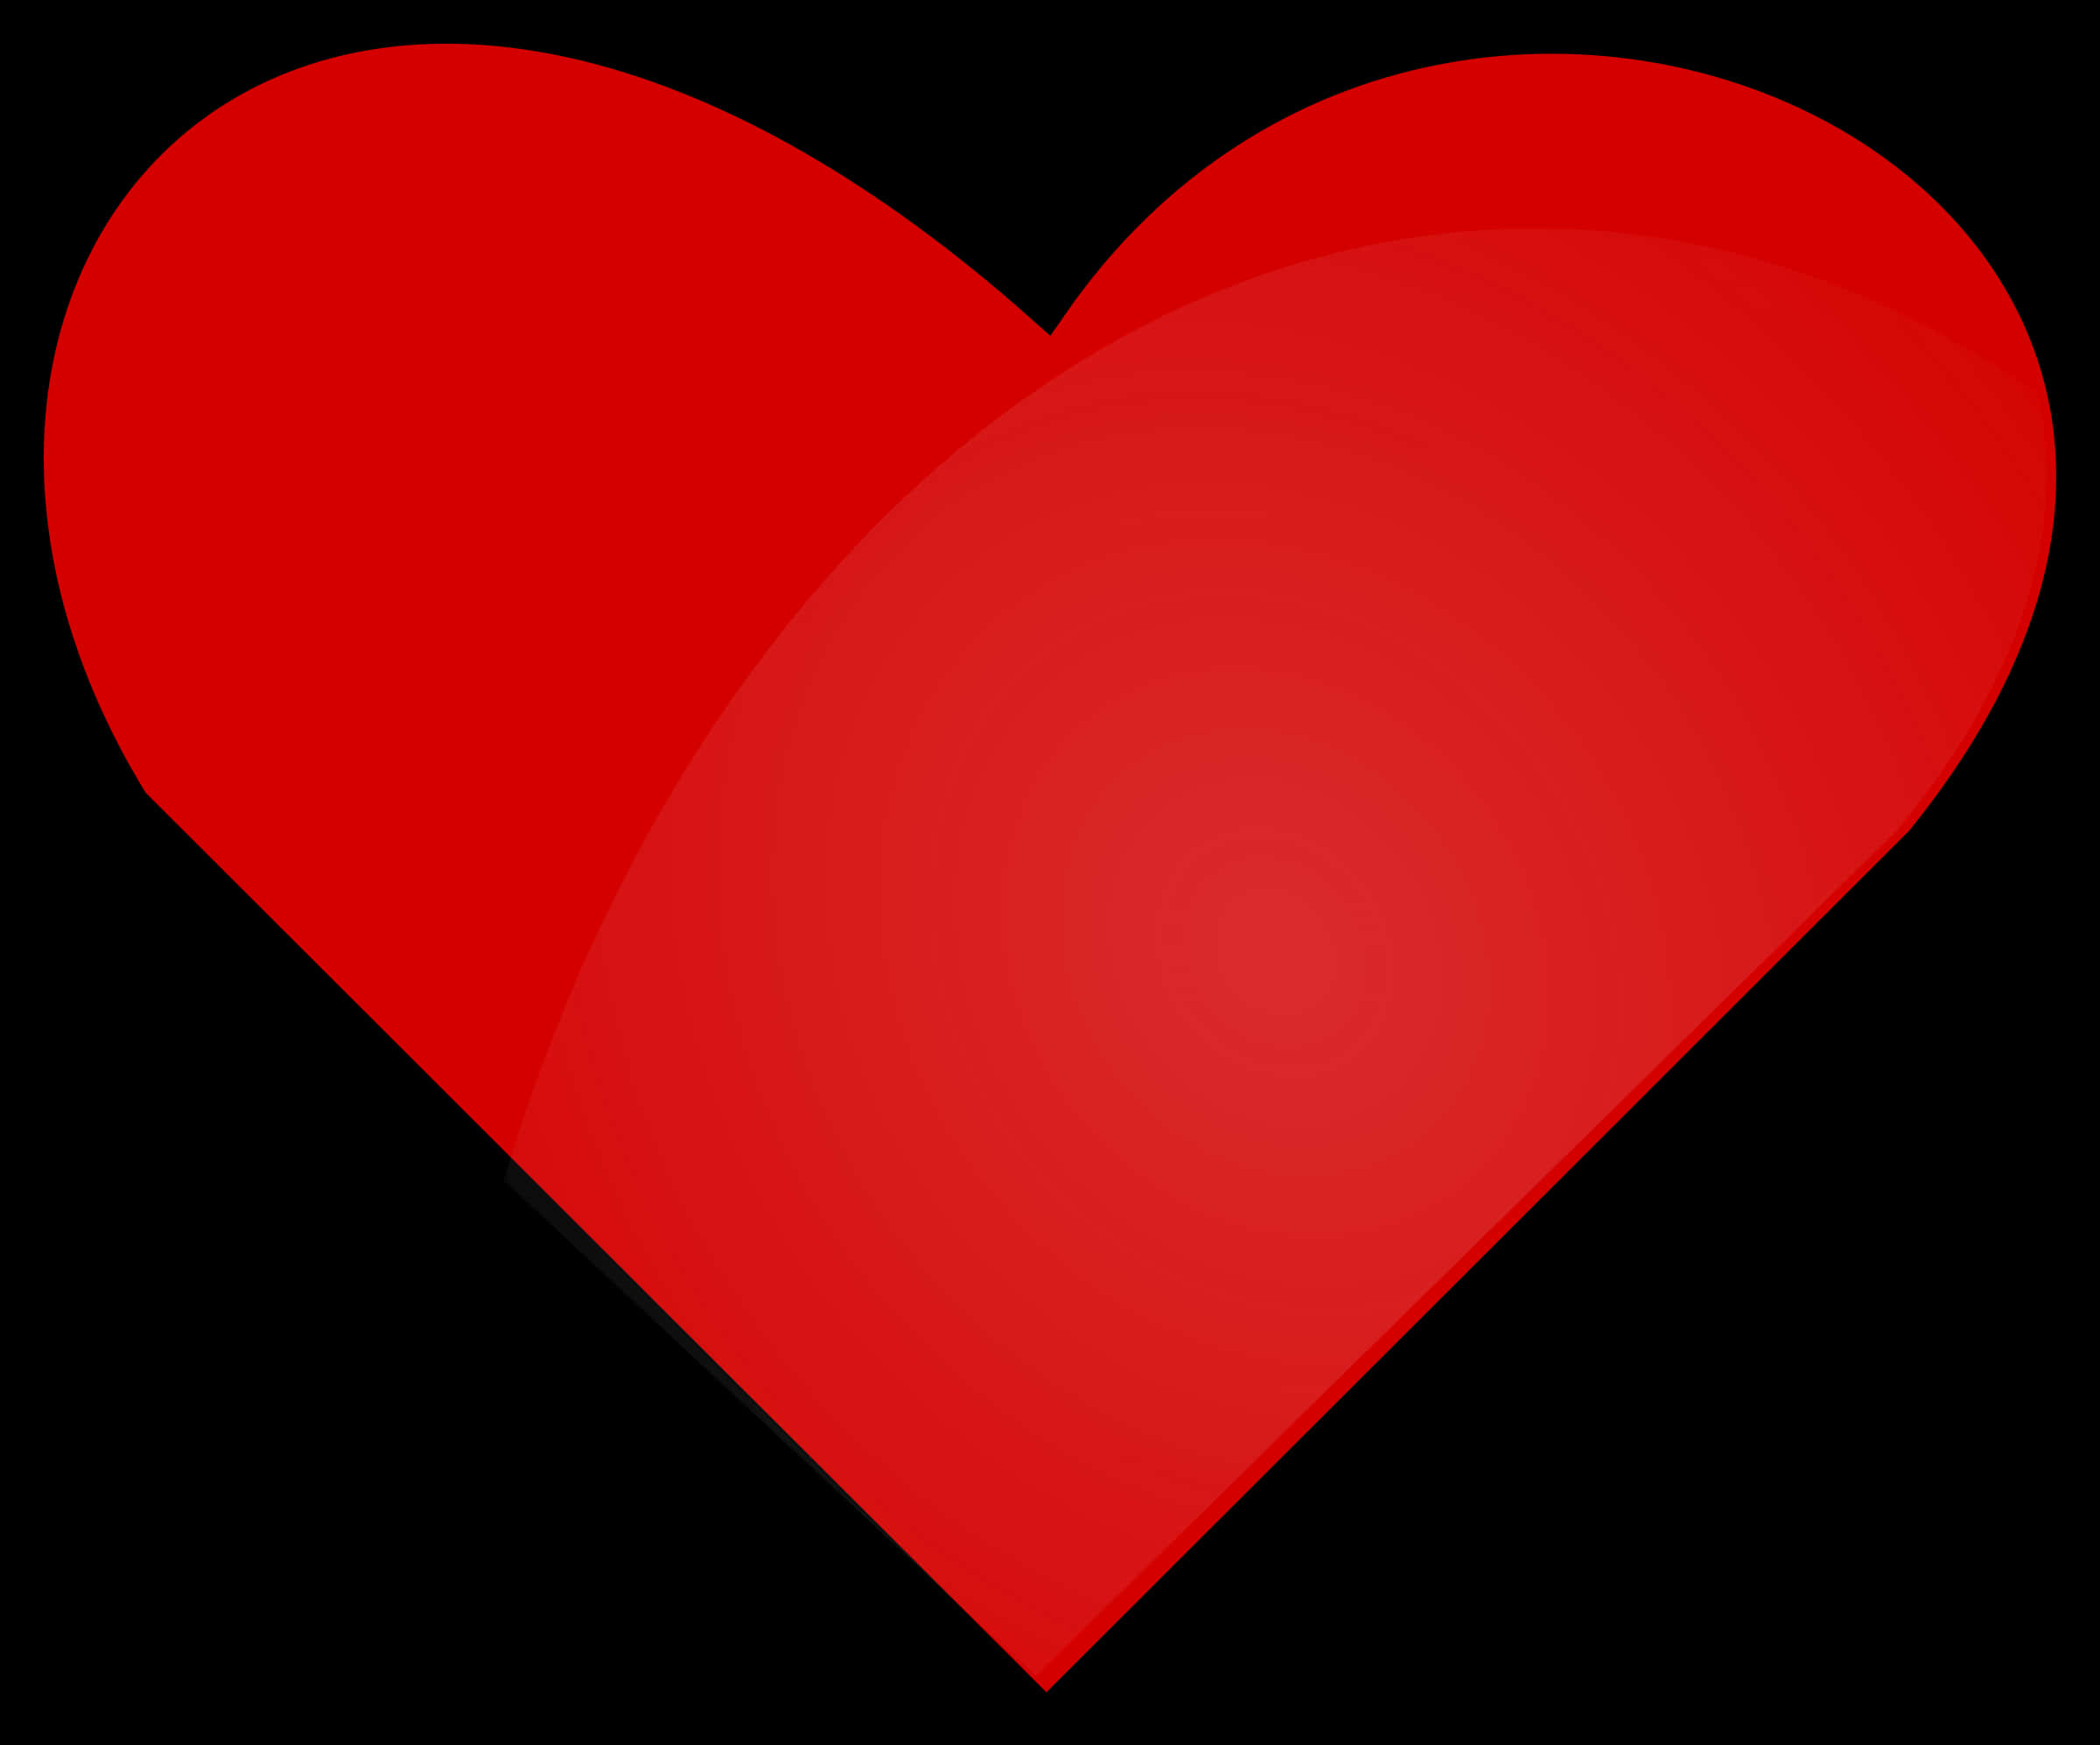 Vibrant Red Heart Graphic PNG